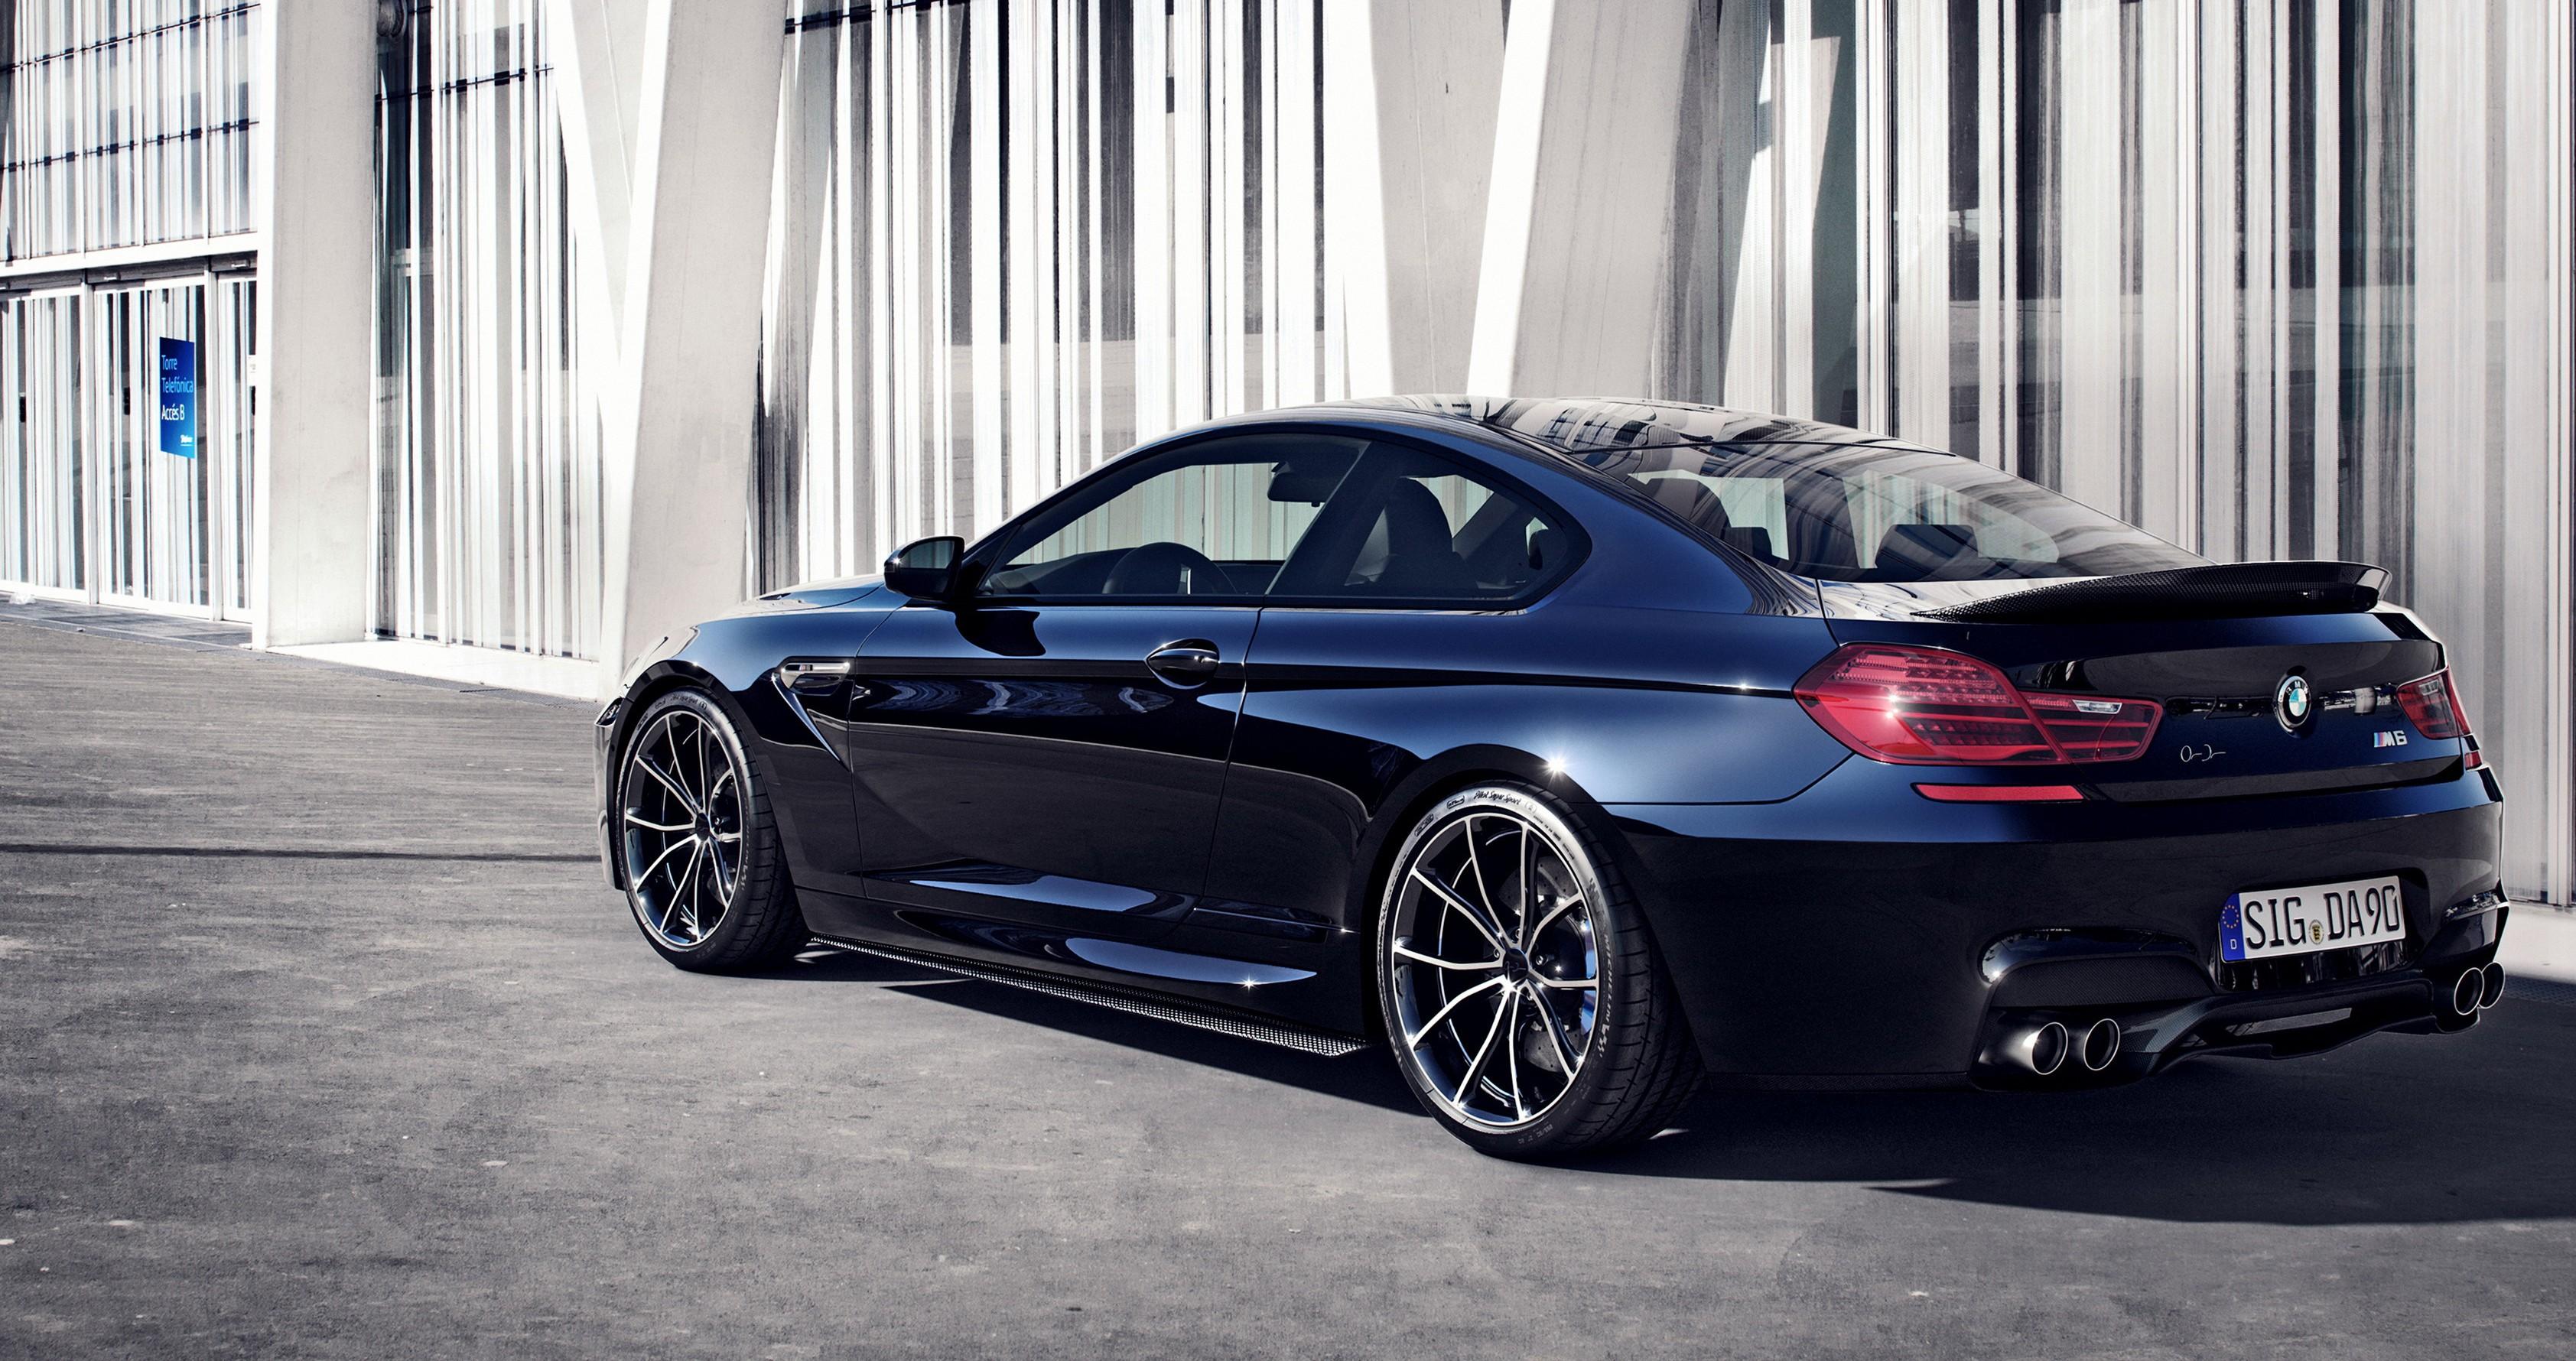 3368 x 1780 · jpeg - BMW M6 Wallpapers, Pictures, Images